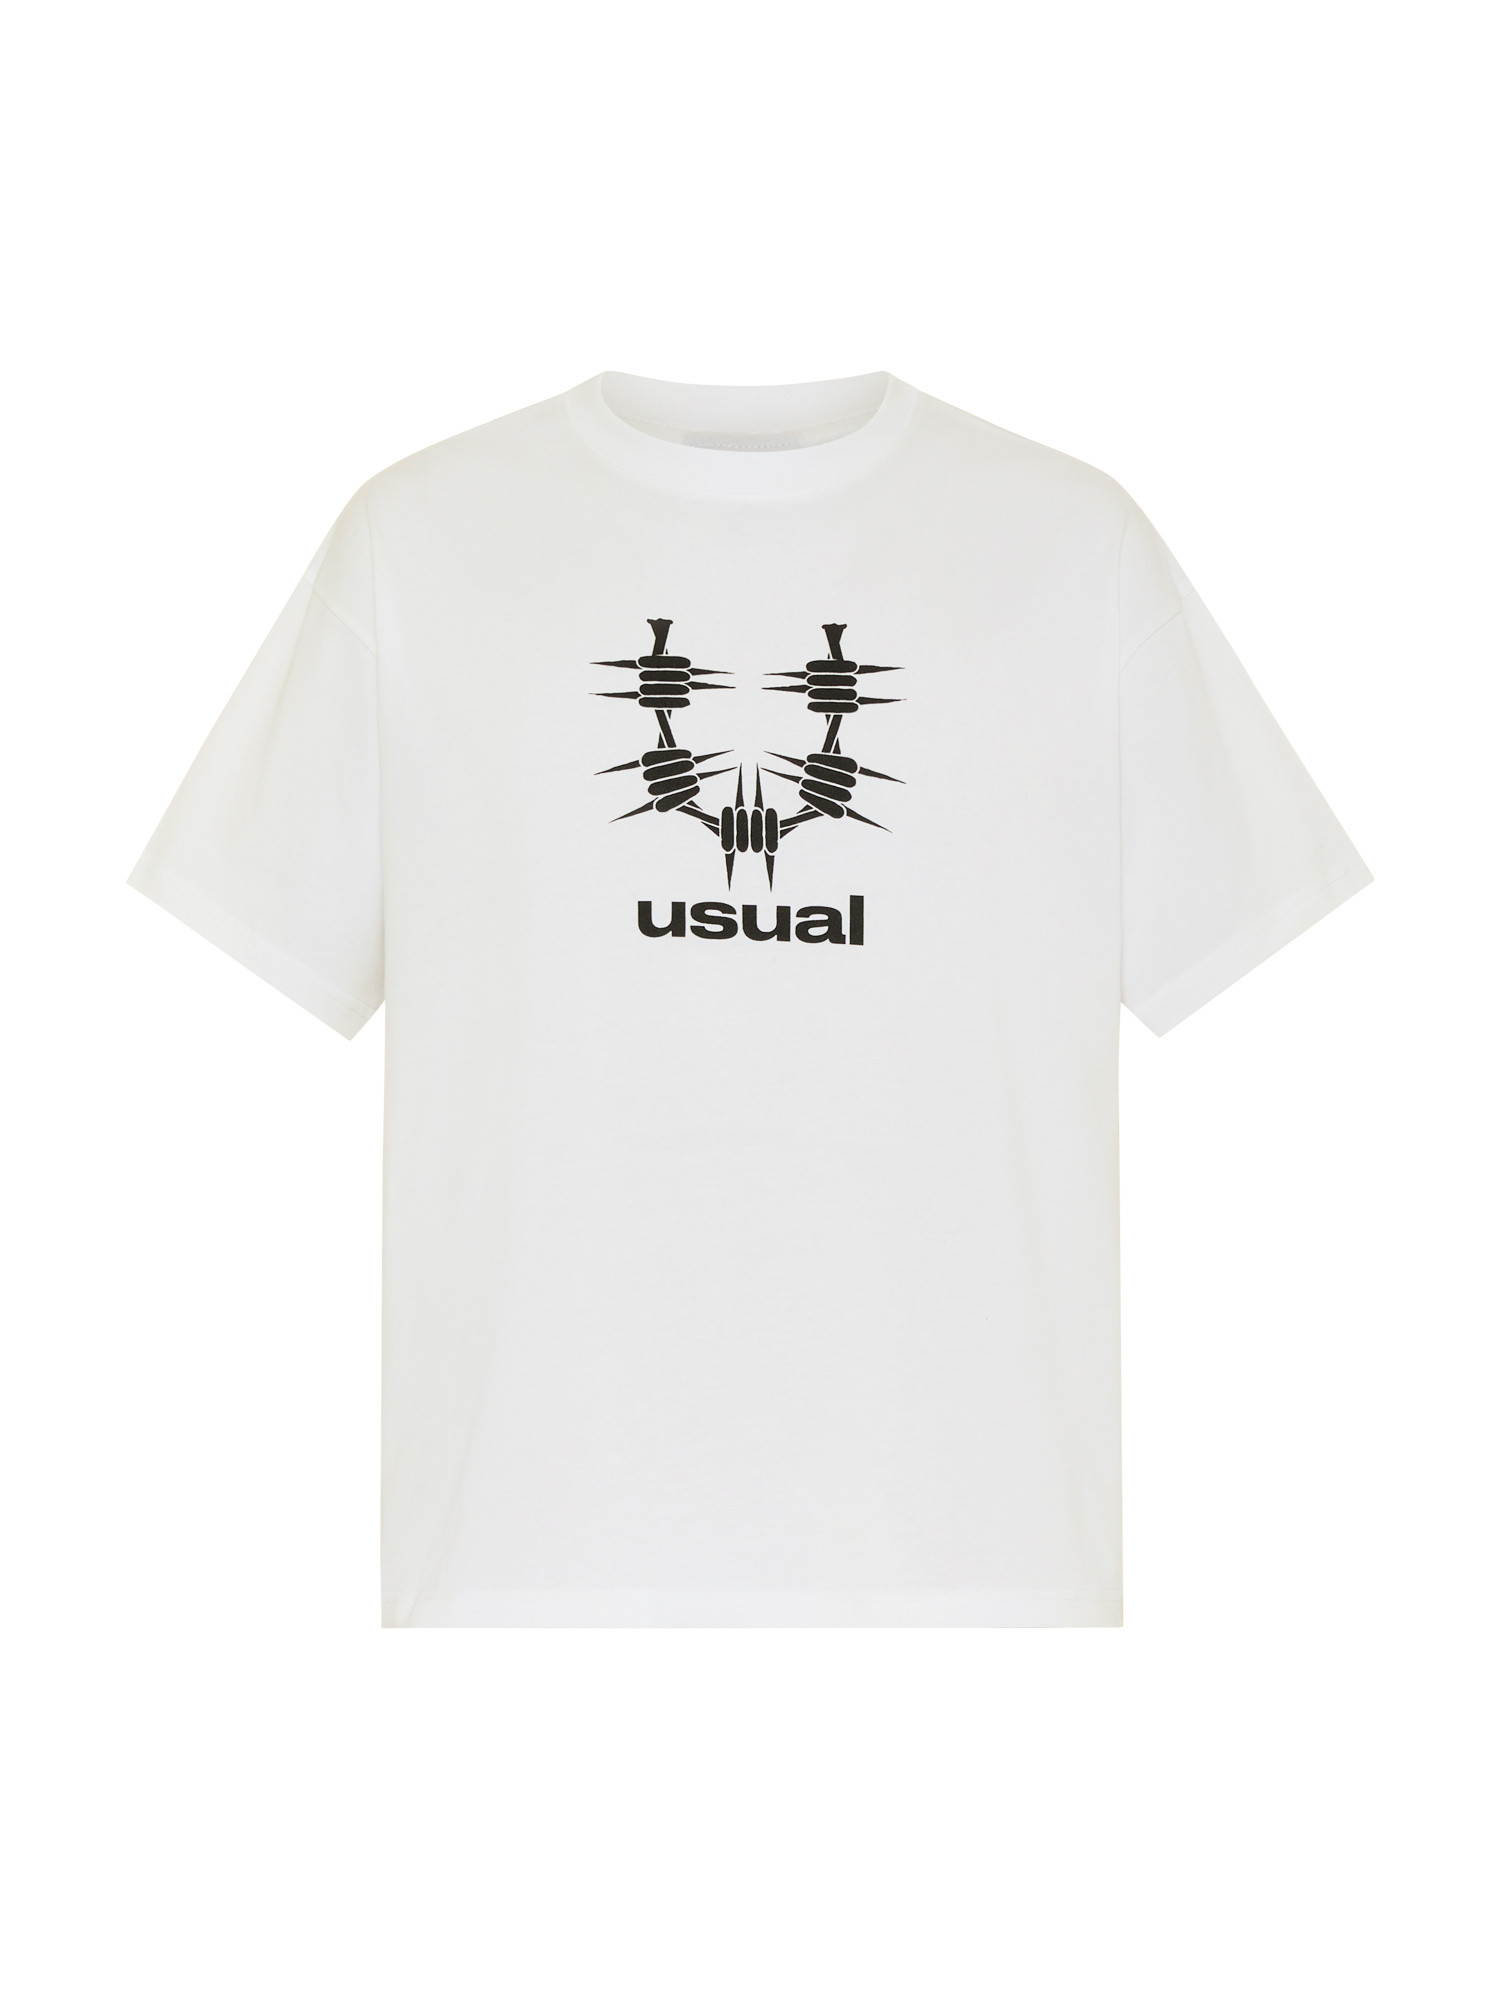 Usual - T-Shirt manica corta About, Bianco, large image number 0